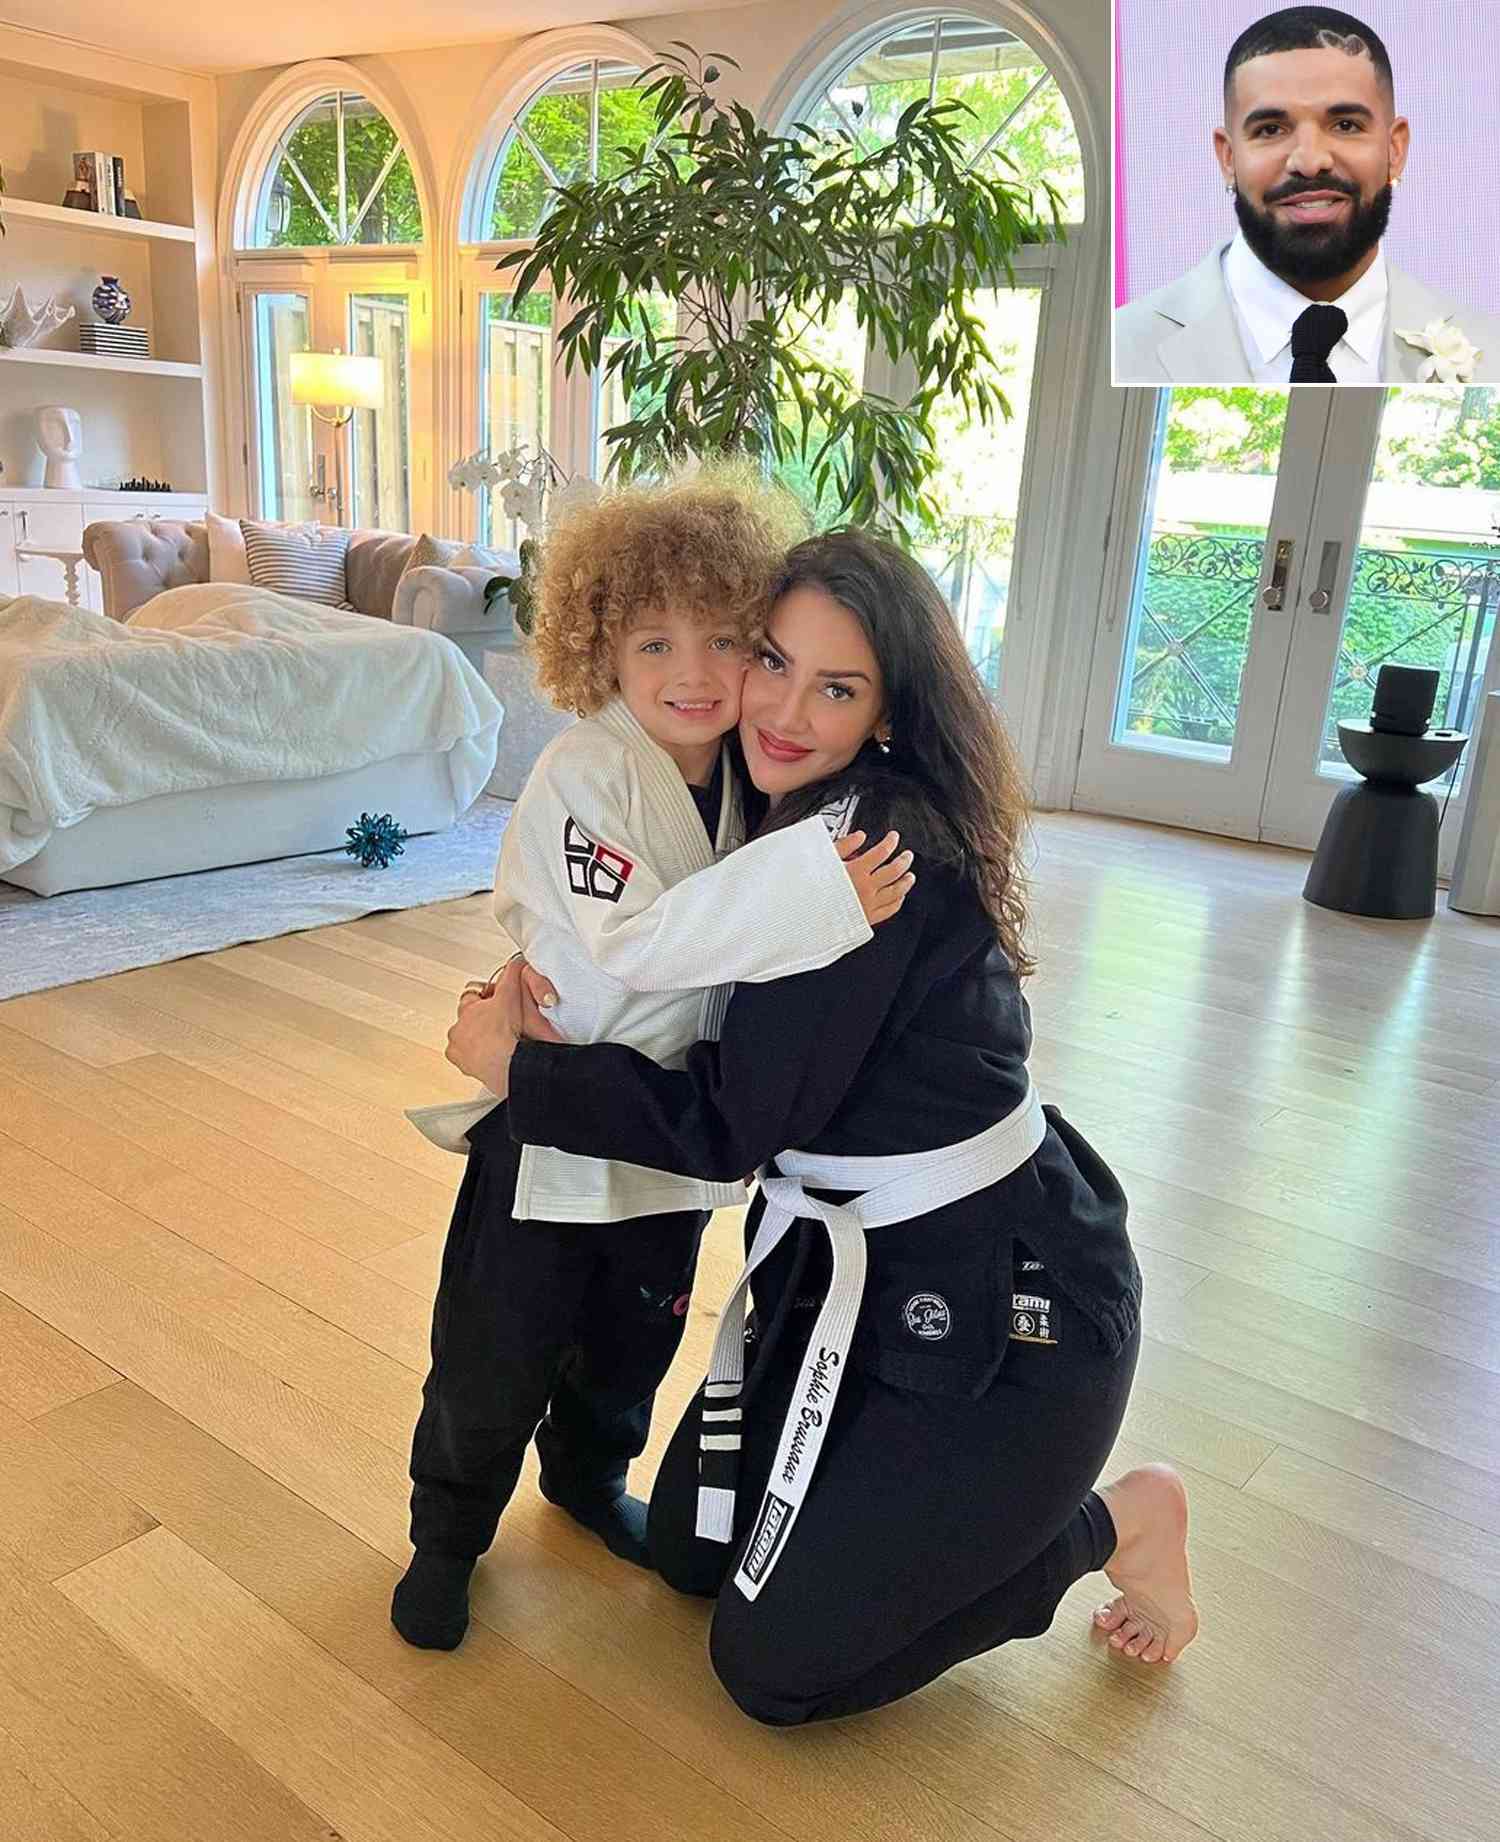 Sophie Brussaux Shares Photo of Her and Adonis in Martial Arts Uniforms